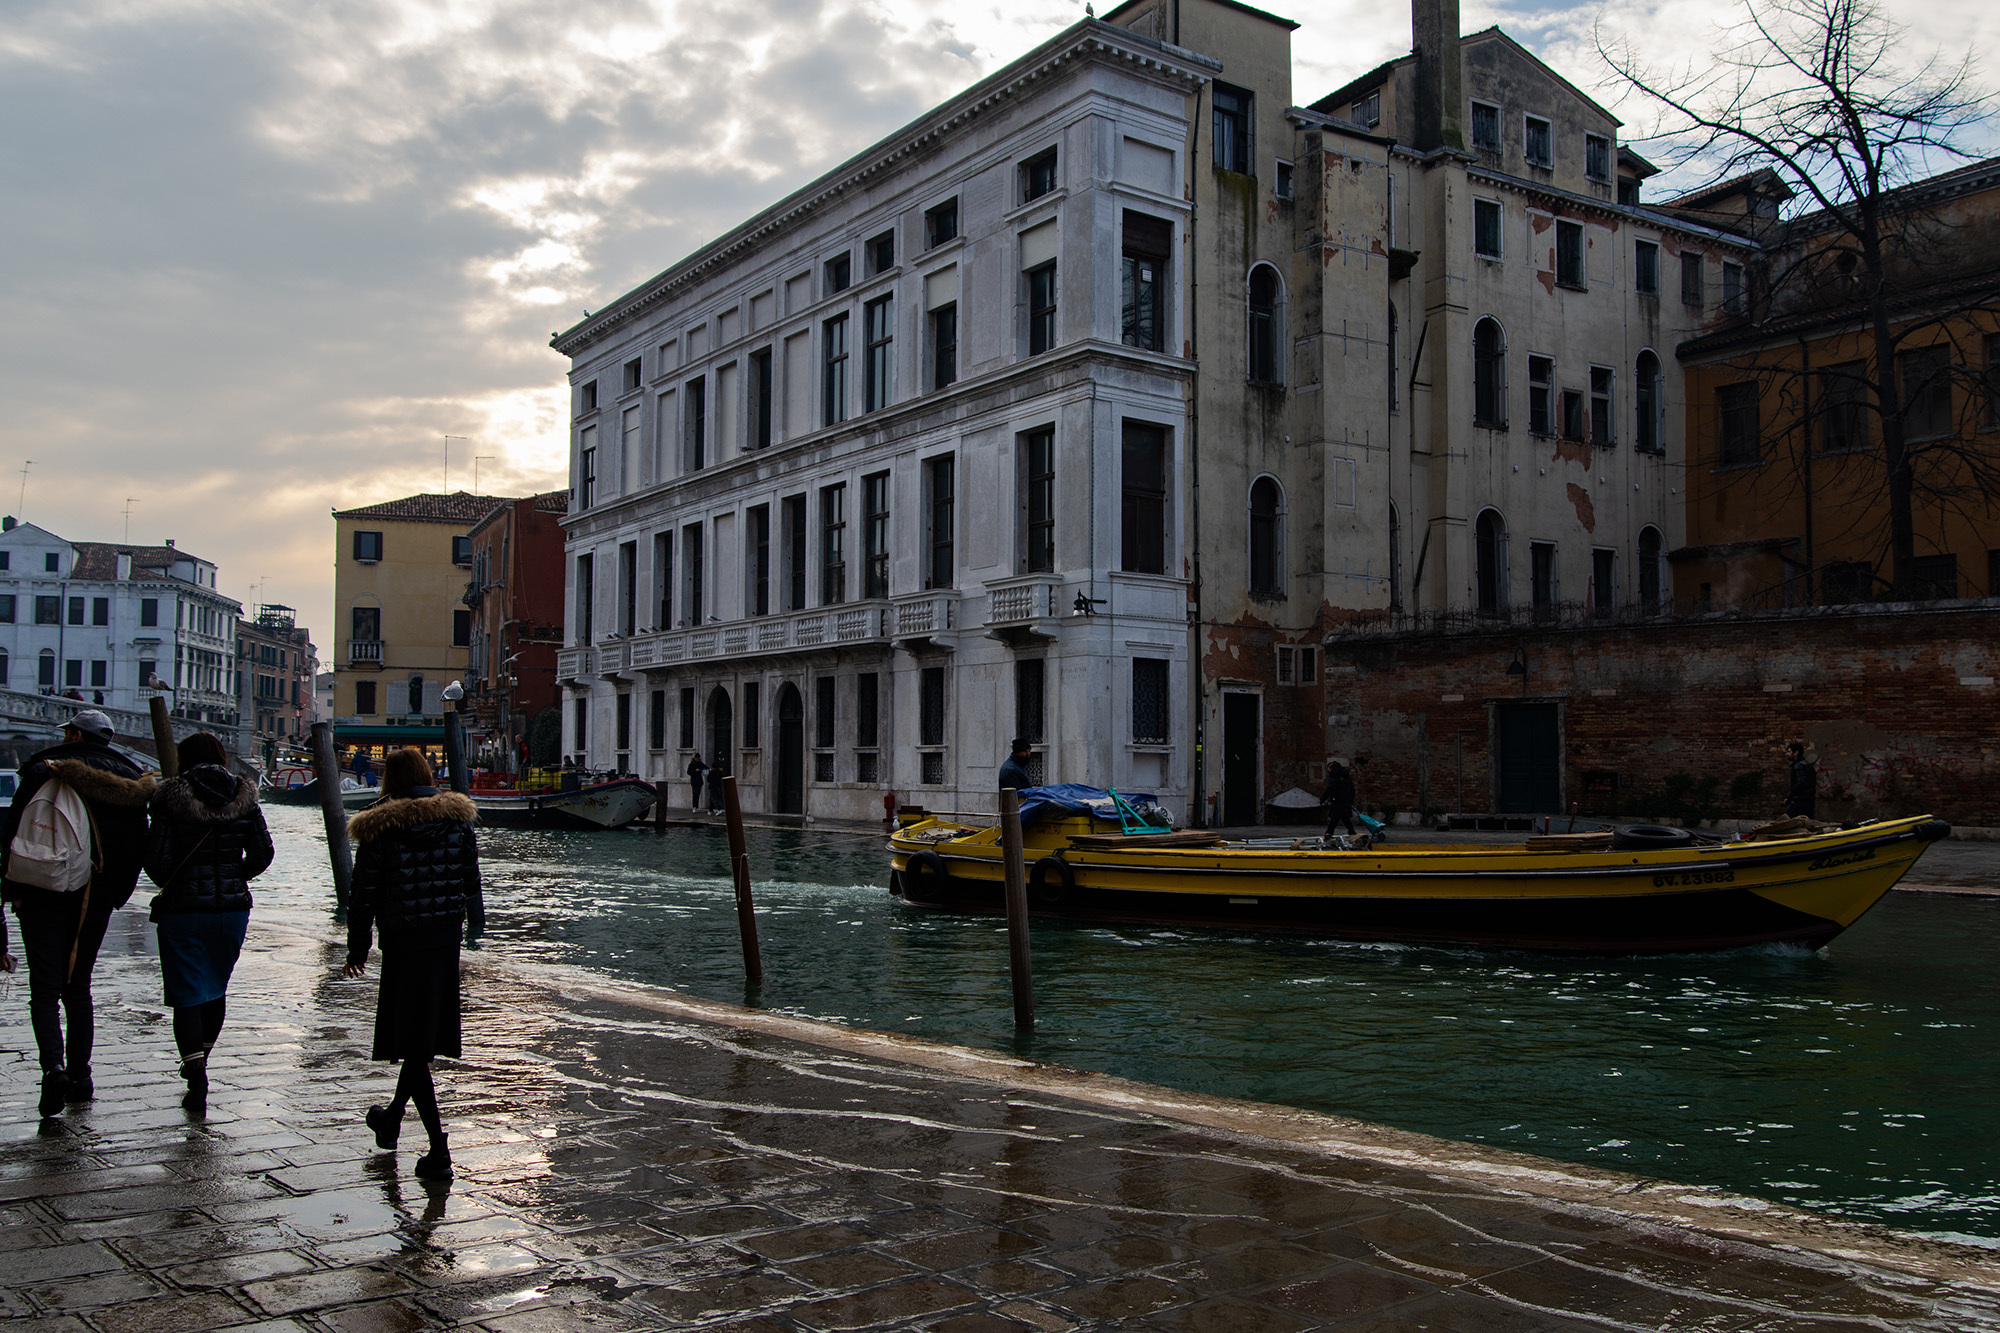 <p>People walk along the fondamenti either side of the Canale di Cannaregio, one of Venice's larger canals. The wake from passing boats washes up over the walkways. </p>